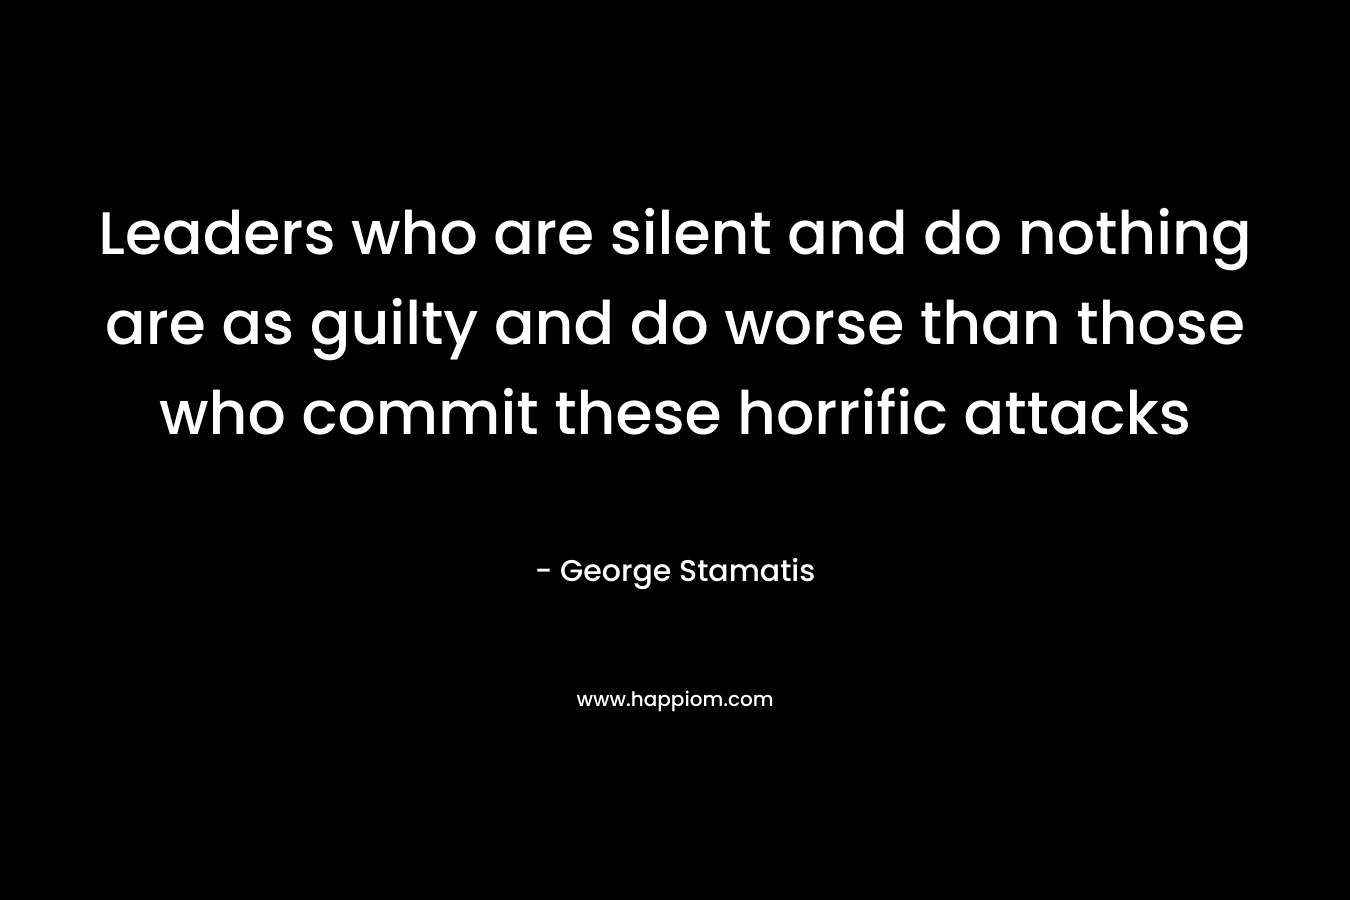 Leaders who are silent and do nothing are as guilty and do worse than those who commit these horrific attacks